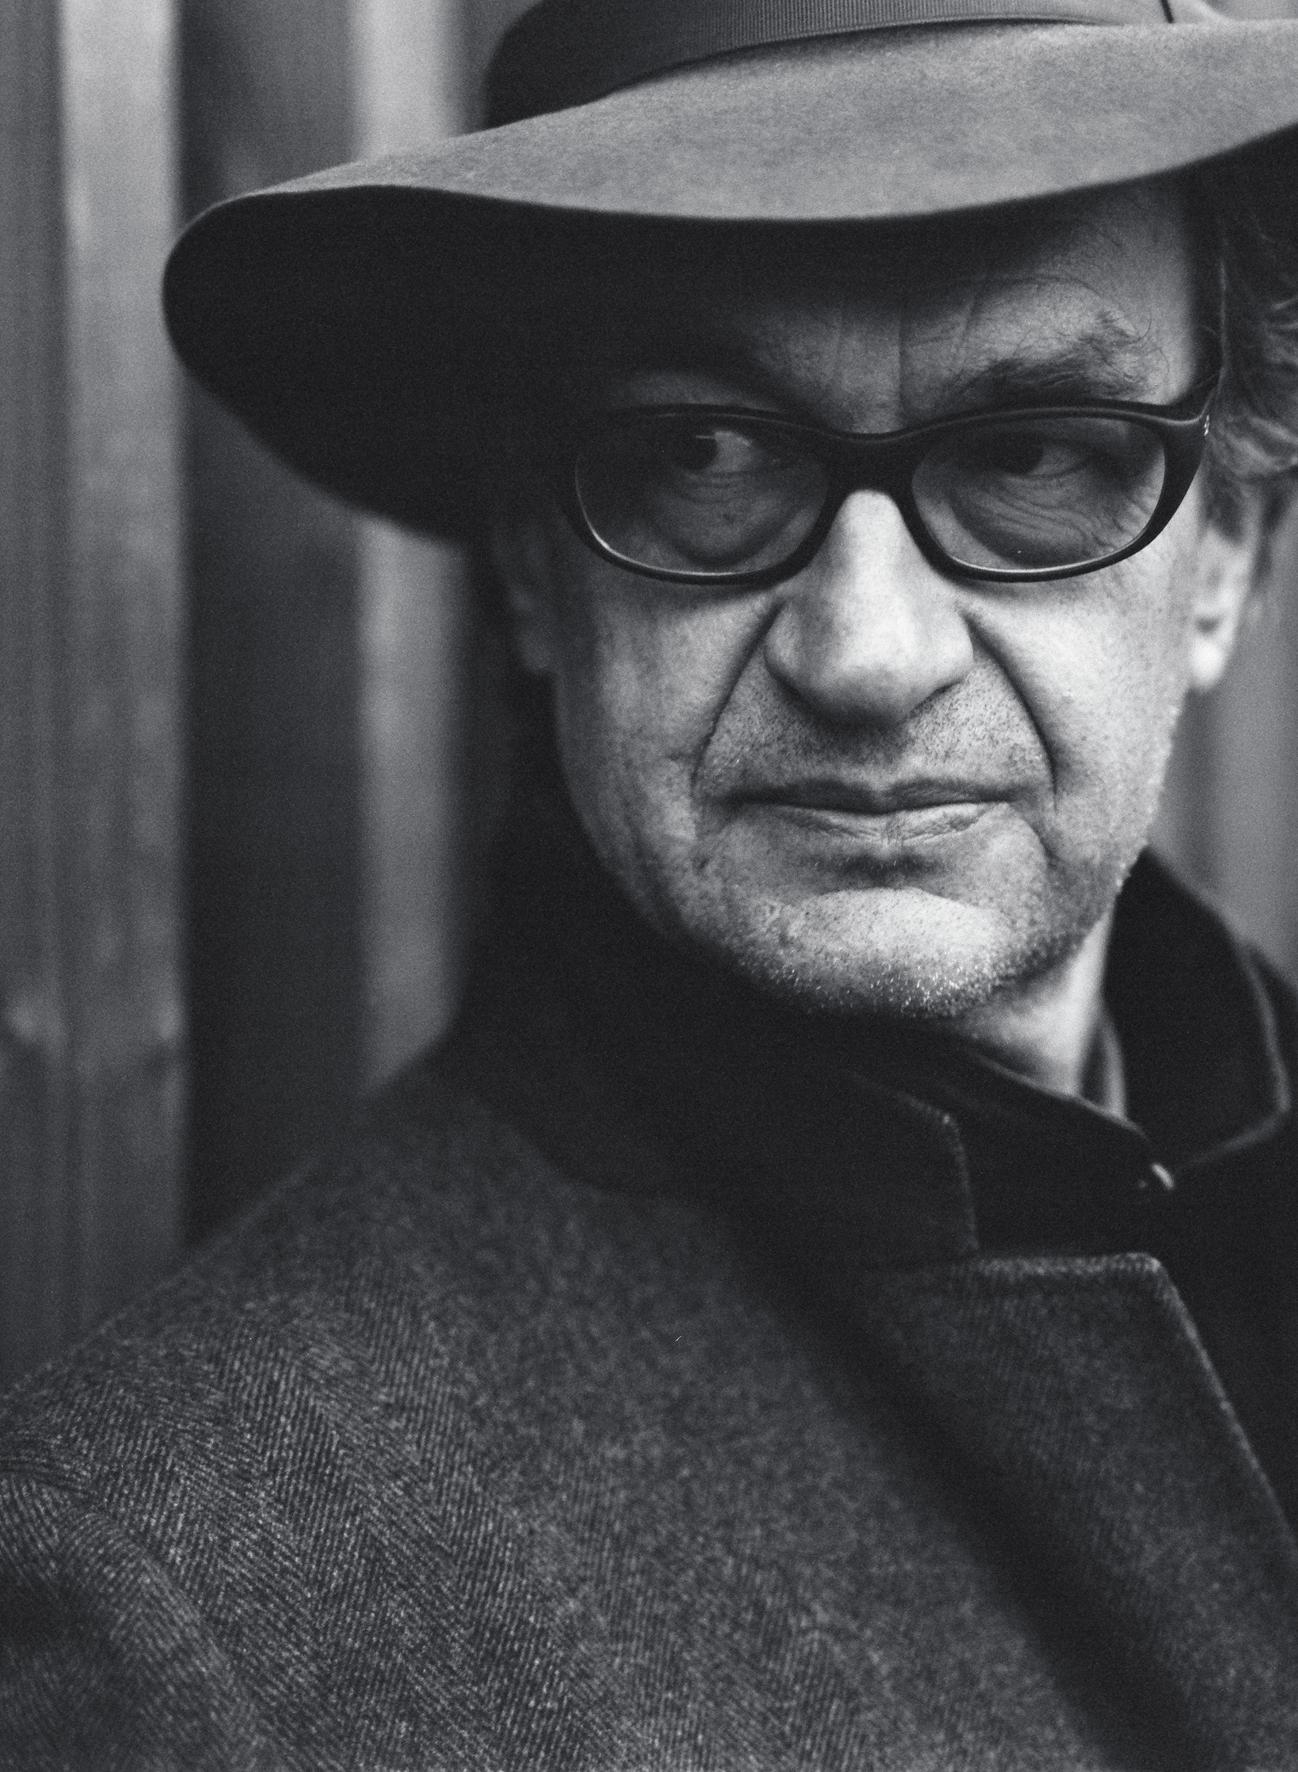 Wim by Donata Wenders